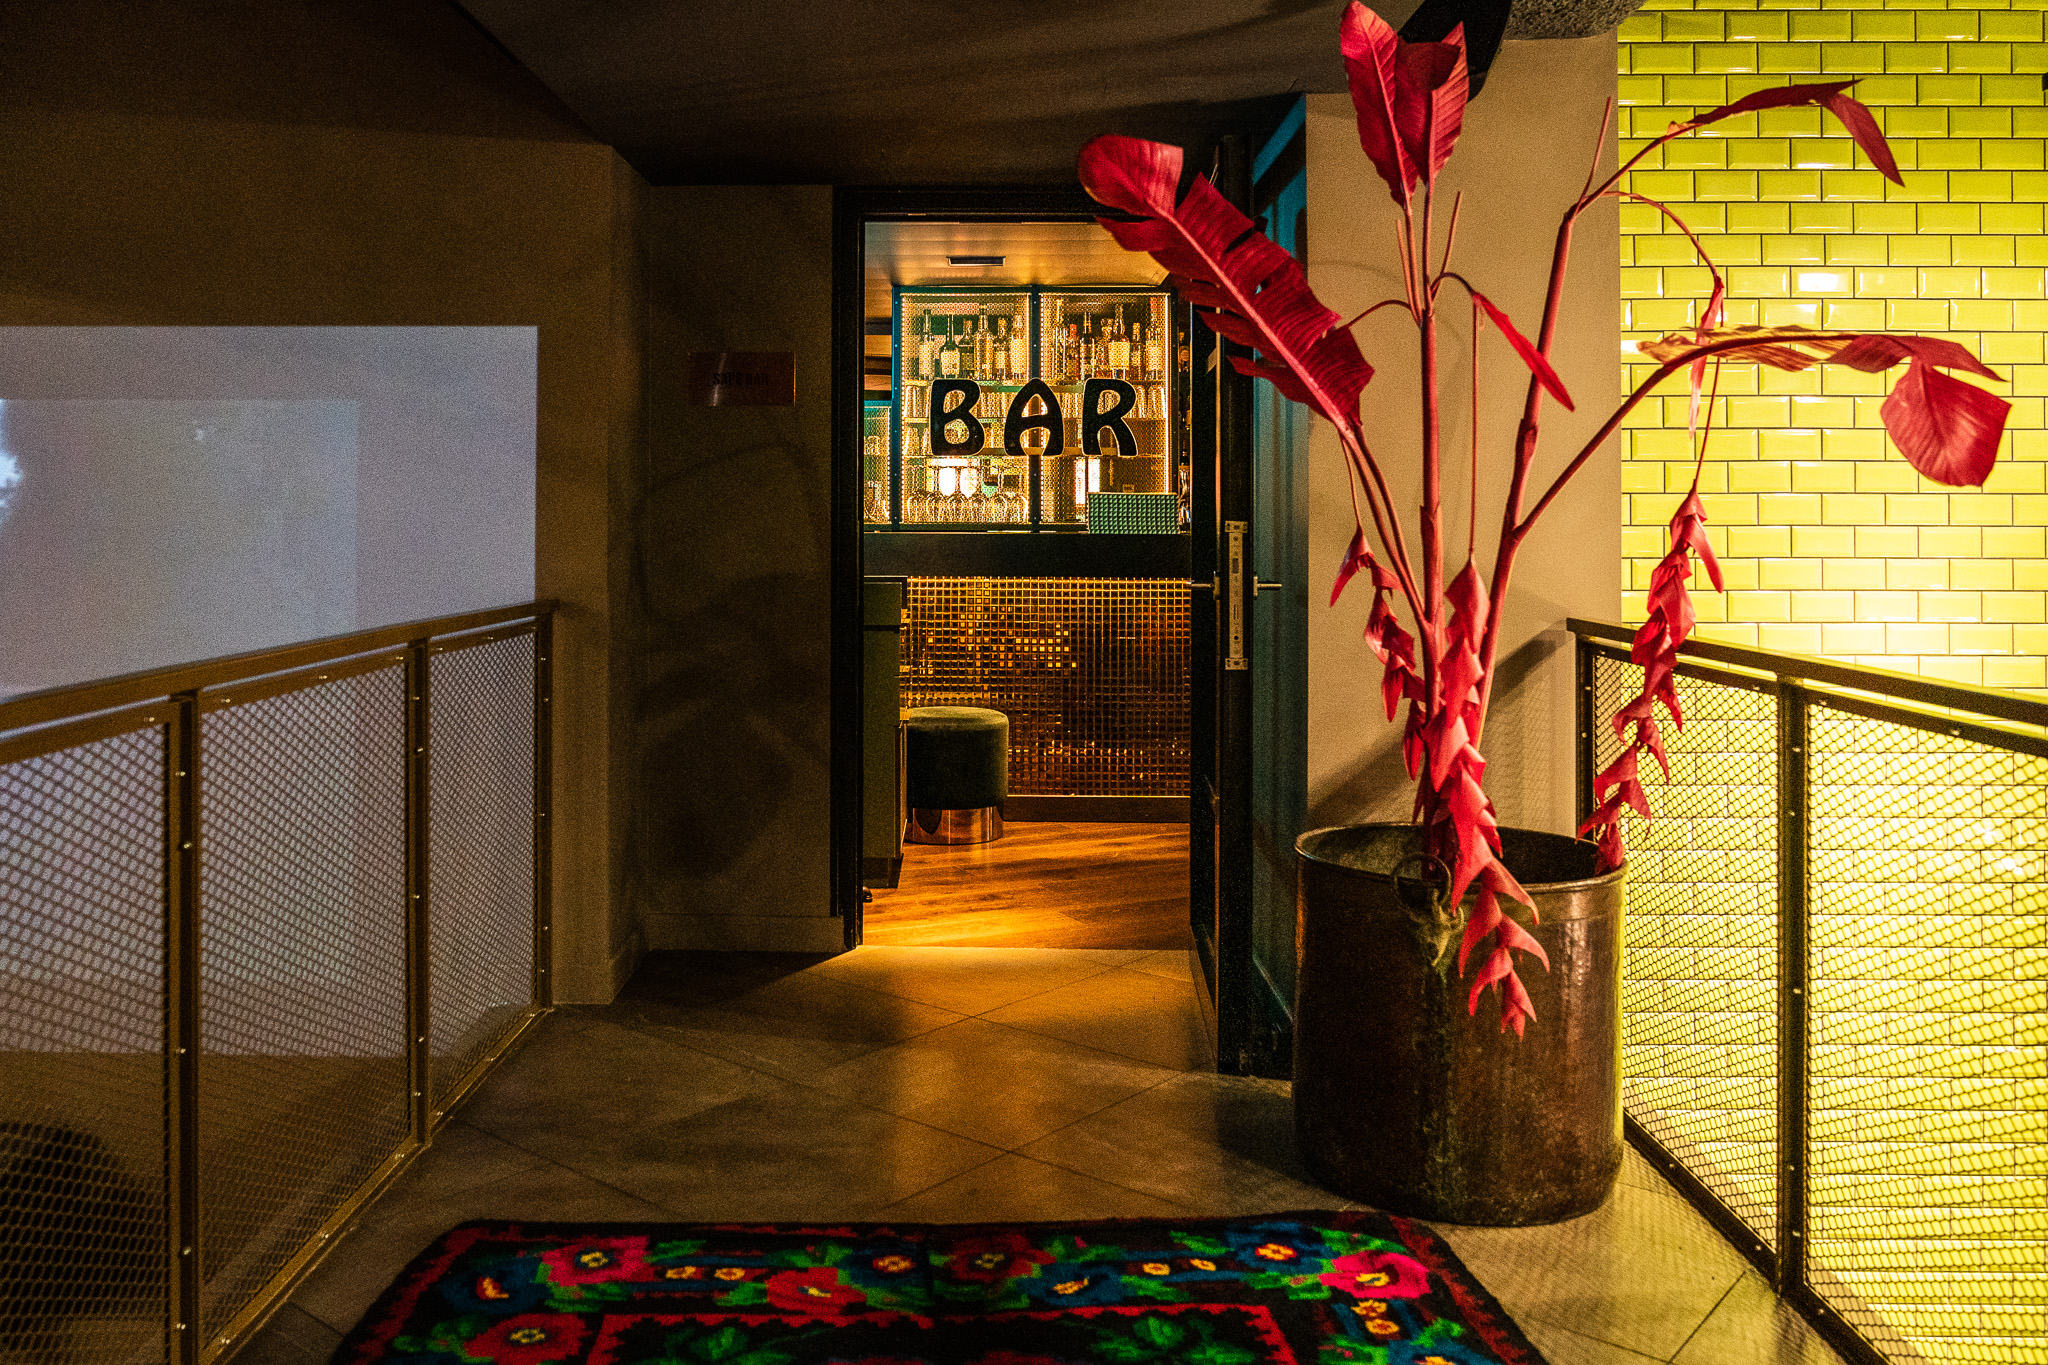 The entrance to the Sape Bar with a large red plant next to the door. Through the door is the counter of the Bar